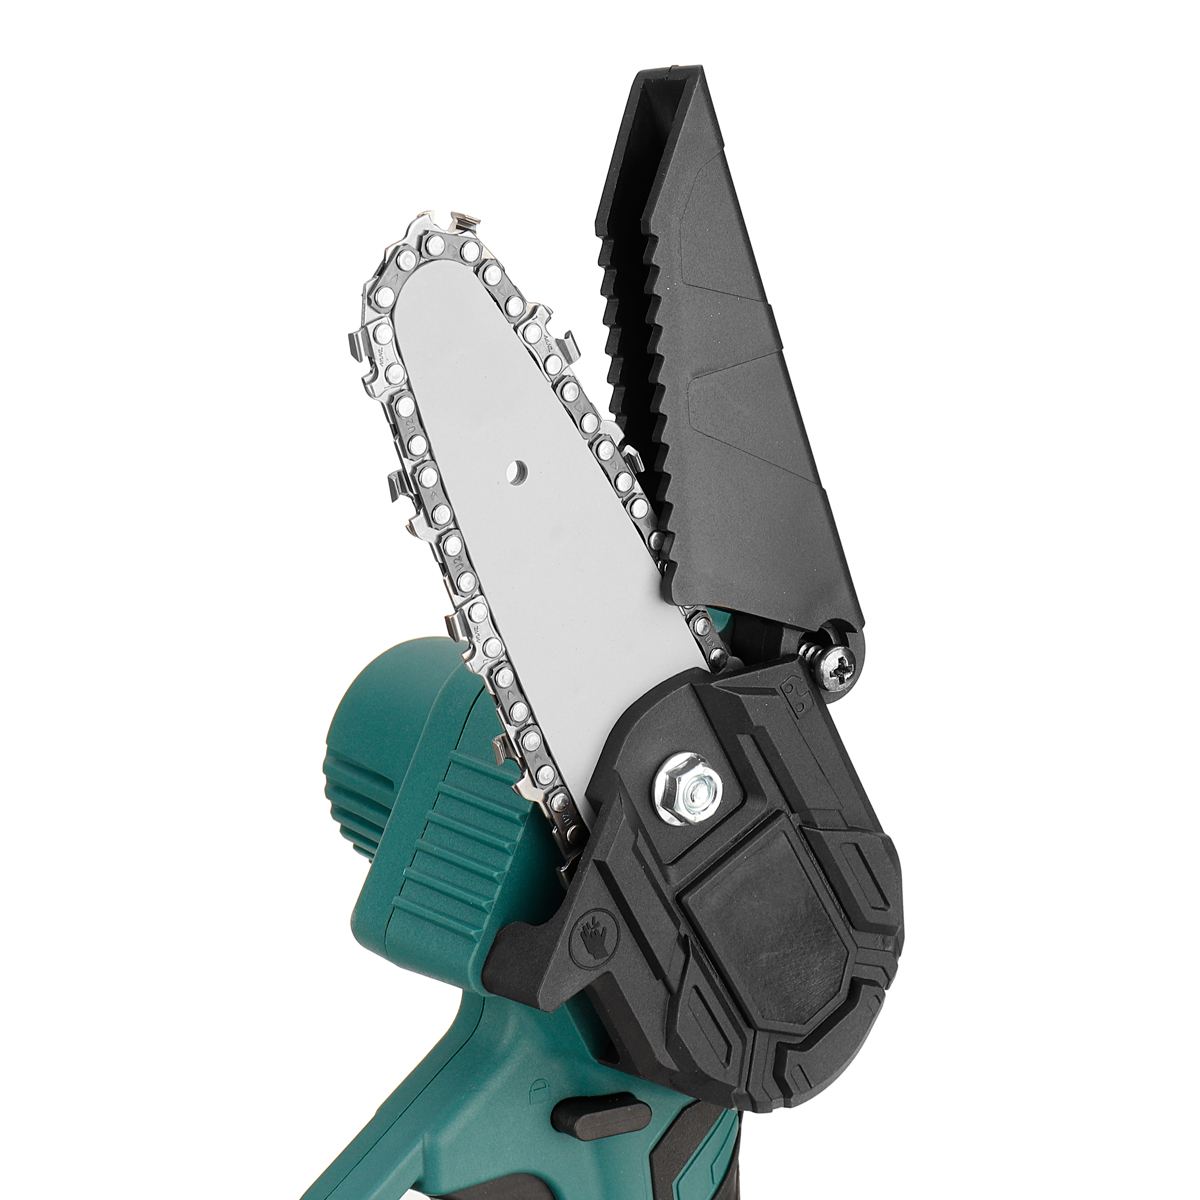 4-Inch-Cordless-Electric-Pruning-Saw-Rechargeable-One-handed-Woodworking-Tool-Mini-Chain-Saw-For-Woo-1850641-4